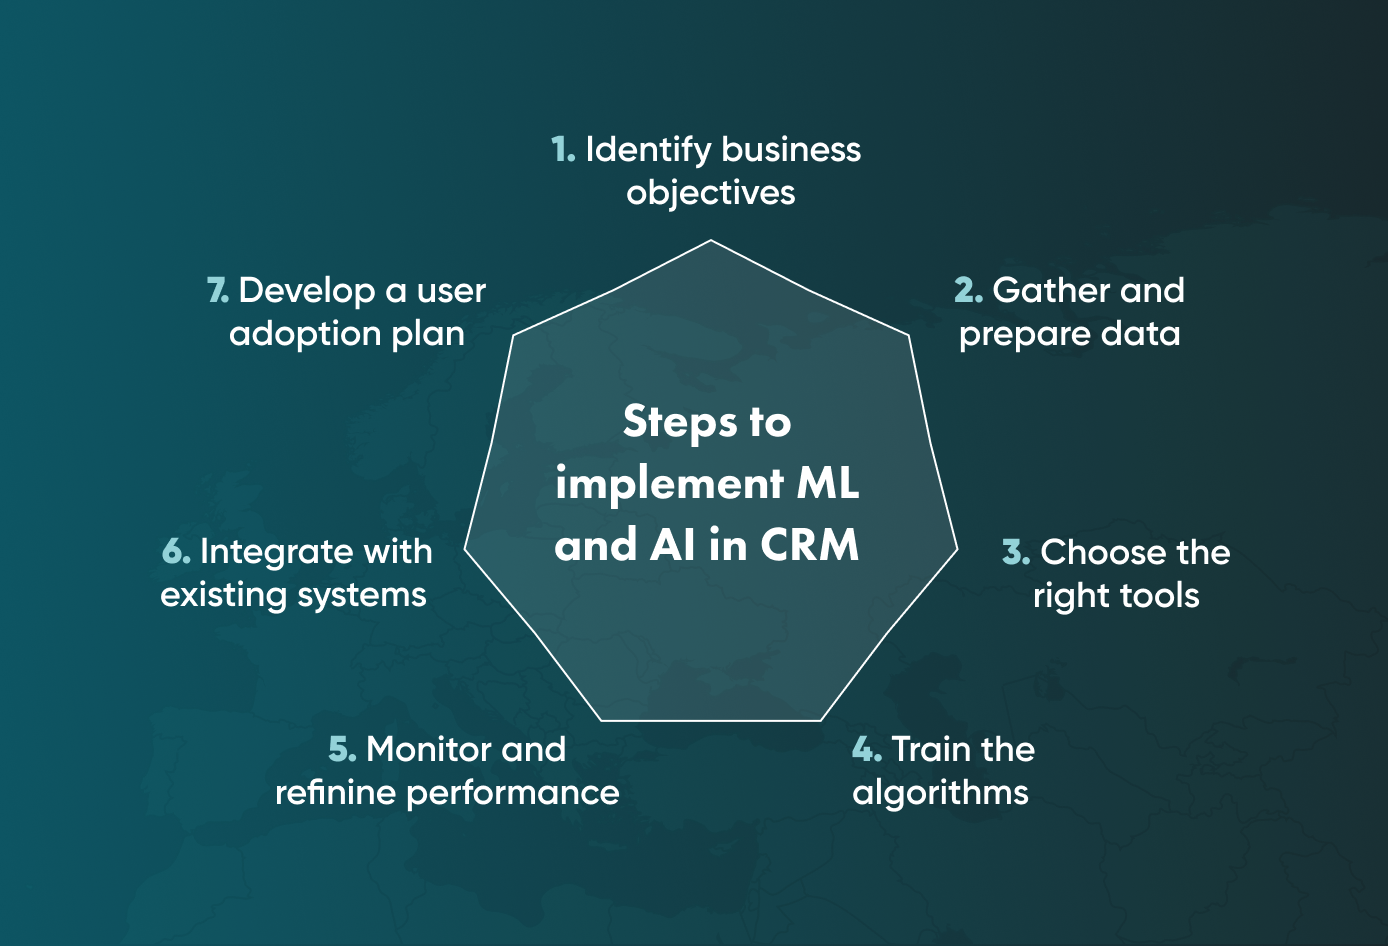 CRM with AI: Follow these steps to implement machine learning and artificial intelligence in your CRM software development.